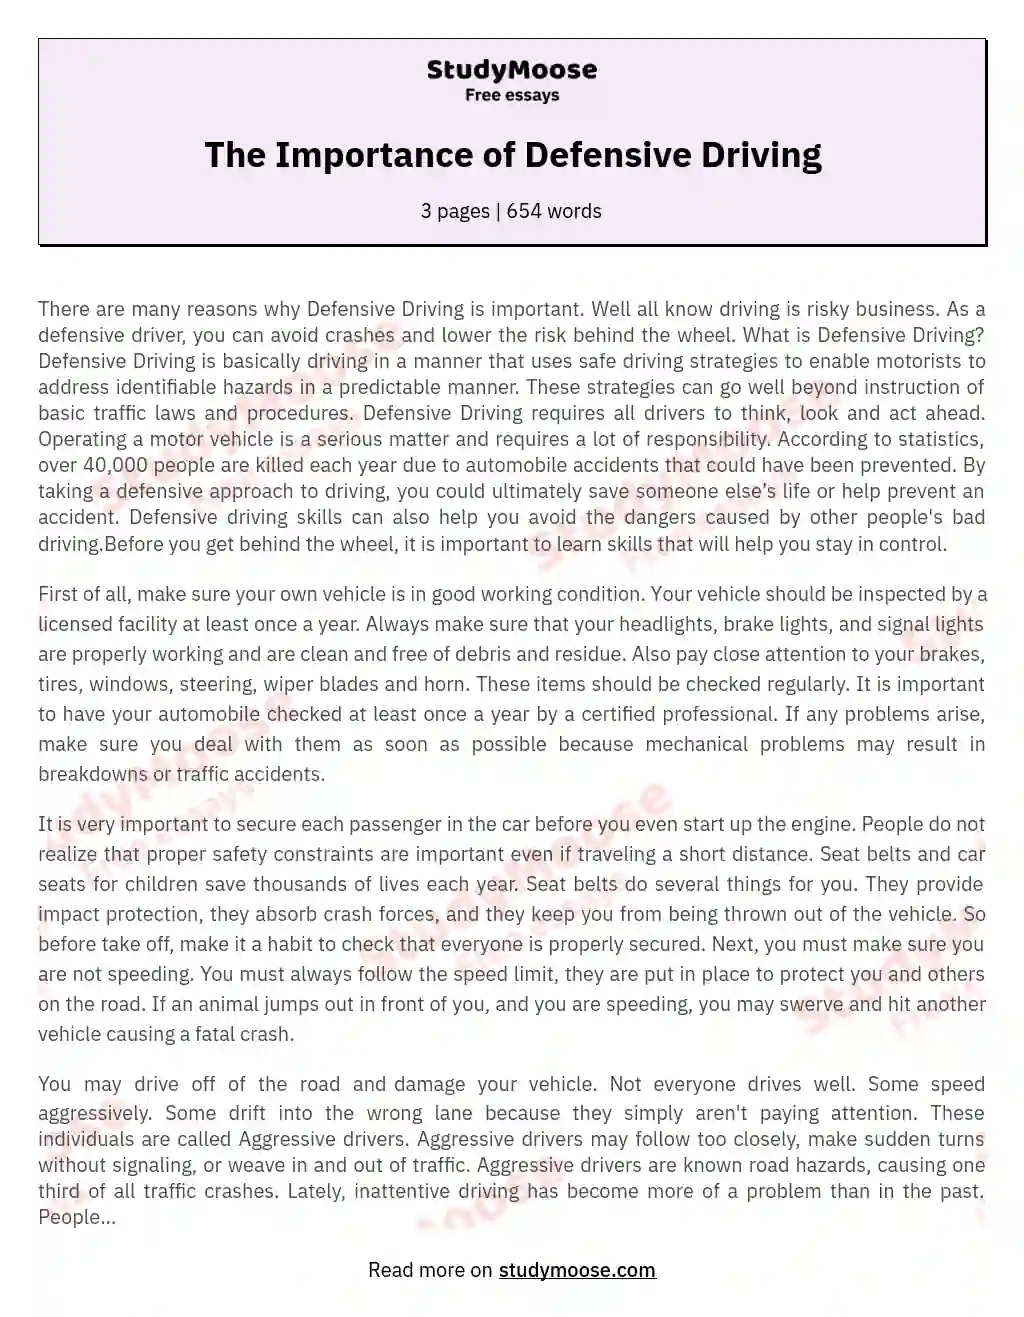 The Importance of Defensive Driving essay